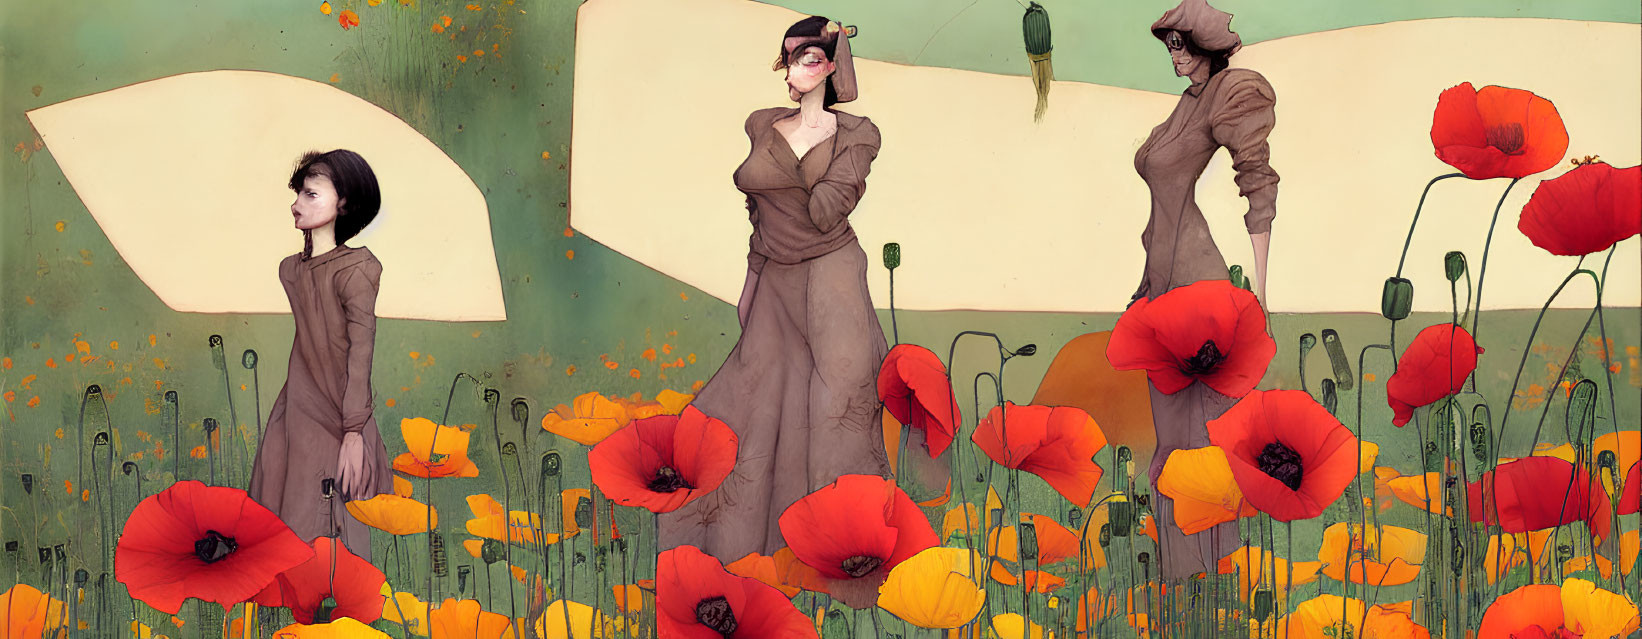 Three stylized women in a field of red poppies of varying heights